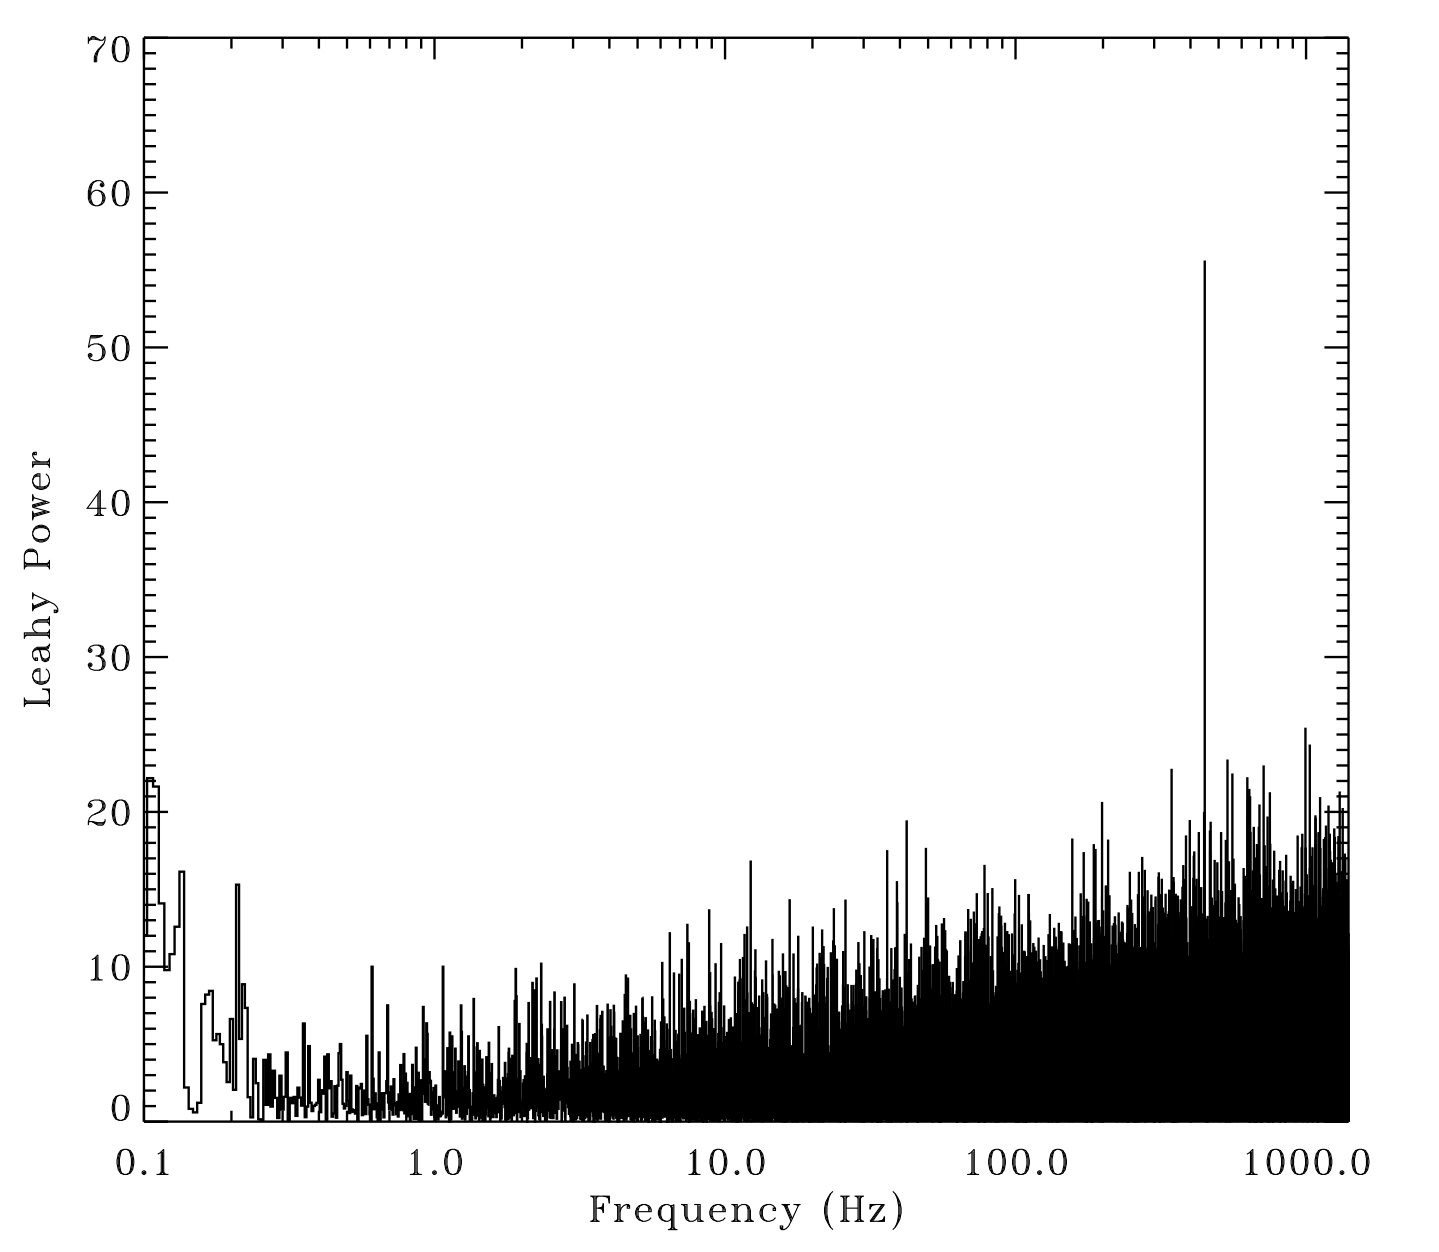 A power-spectral density plot of NICER's first 2,700-second exposure on the newly detected, bright Galactic X-ray source SRGA J144459. The dense scruff shows the amplitude of X-ray brightness variations on various timescales (frequencies in cycles per second, or Hertz), with the variation amplitudes normalized according to an approach (established by D. Leahy) that can be converted to probabilities of chance occurrence due to noise. The single sharp spike at right, at a frequency near 448 Hz, is a result of pulsations from the newly discovered neutron star's rapid rotation, with a chance occurrence probability less than 1 in 10,000.